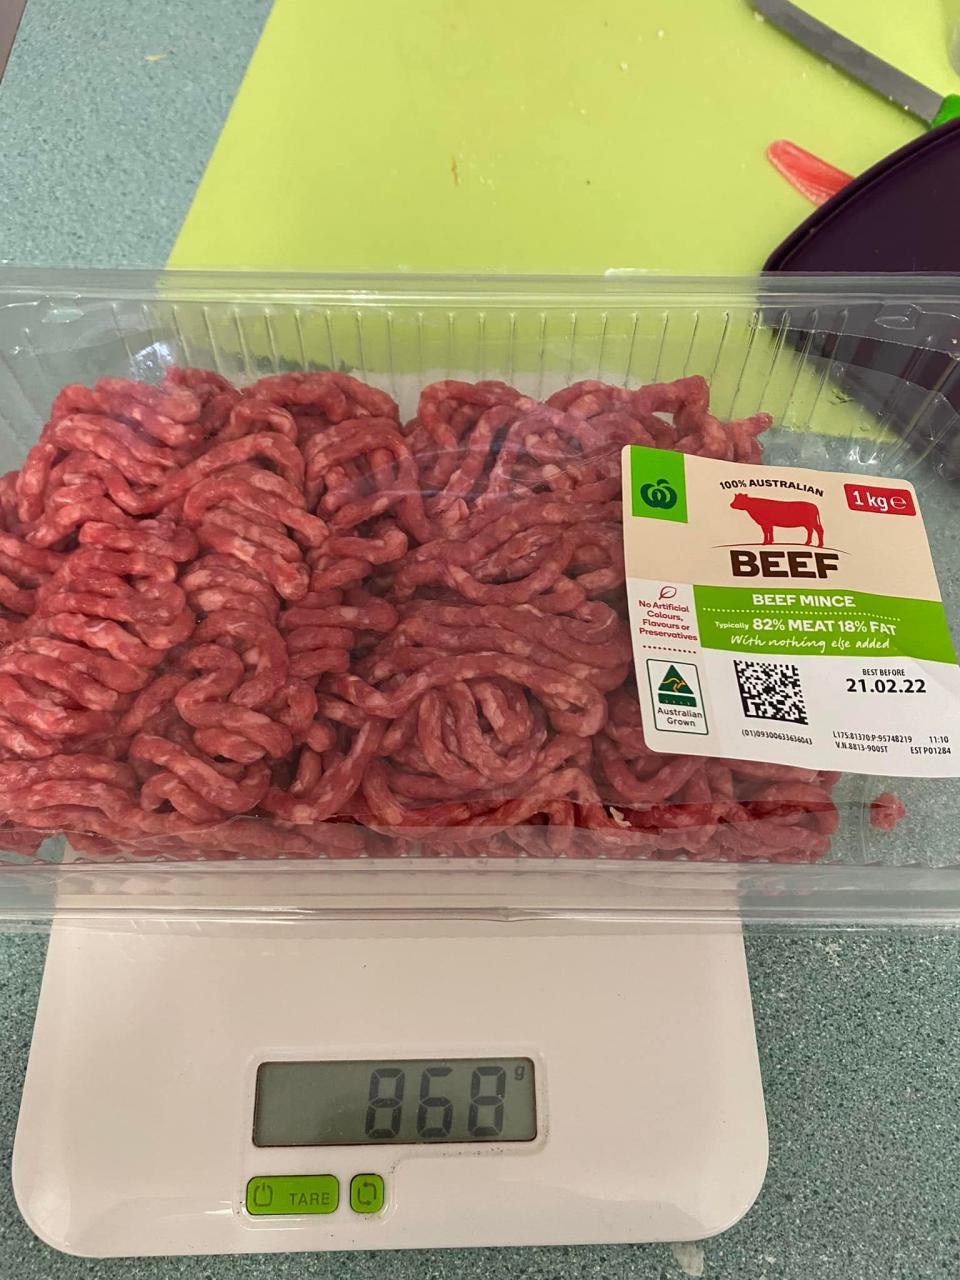 Woolworths shopper shares beef mince on scale showing 868g